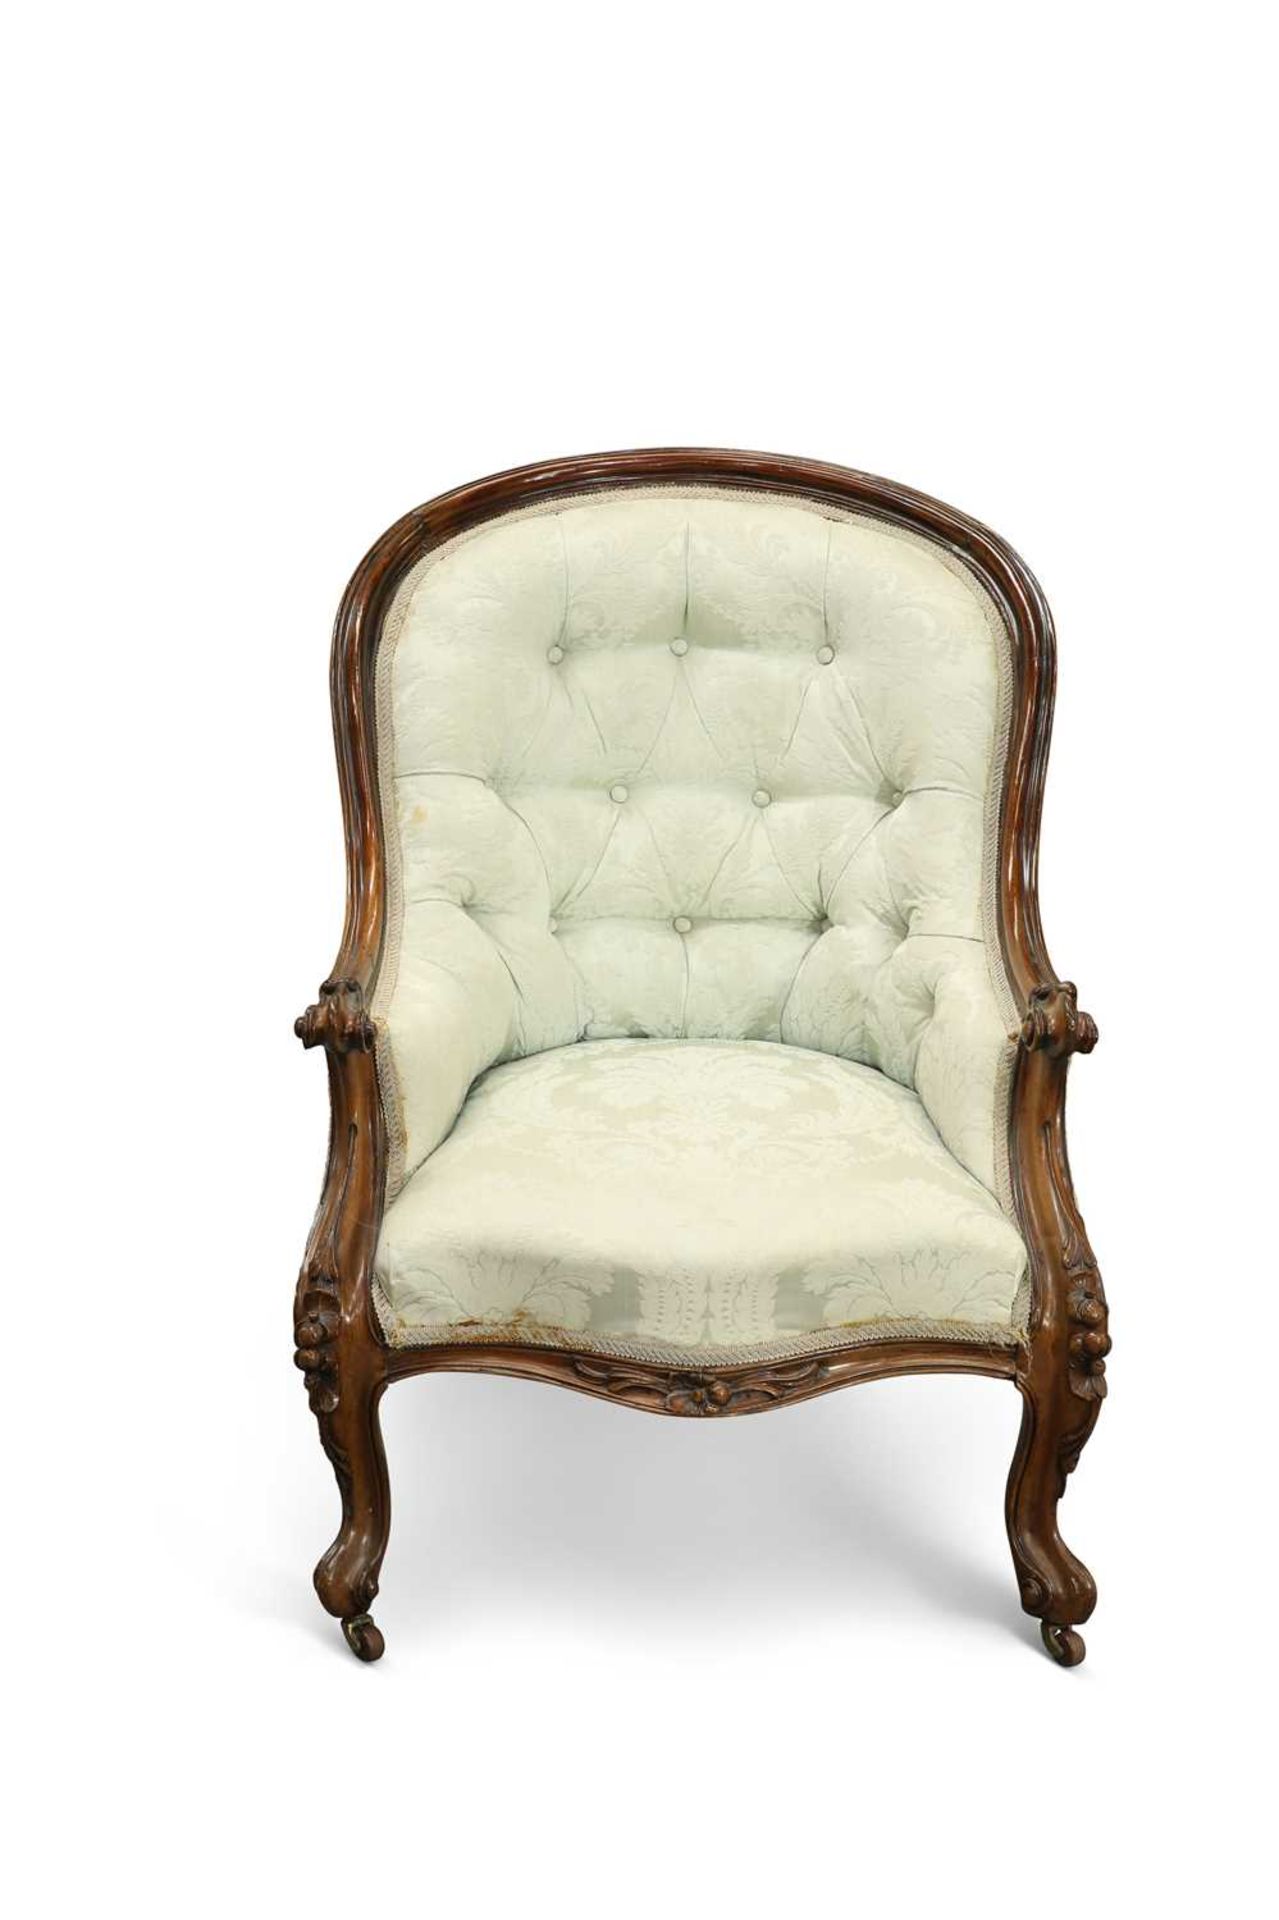 A VICTORIAN ROSEWOOD AND UPHOLSTERED SALON CHAIR, CIRCA 1870 - Image 2 of 2